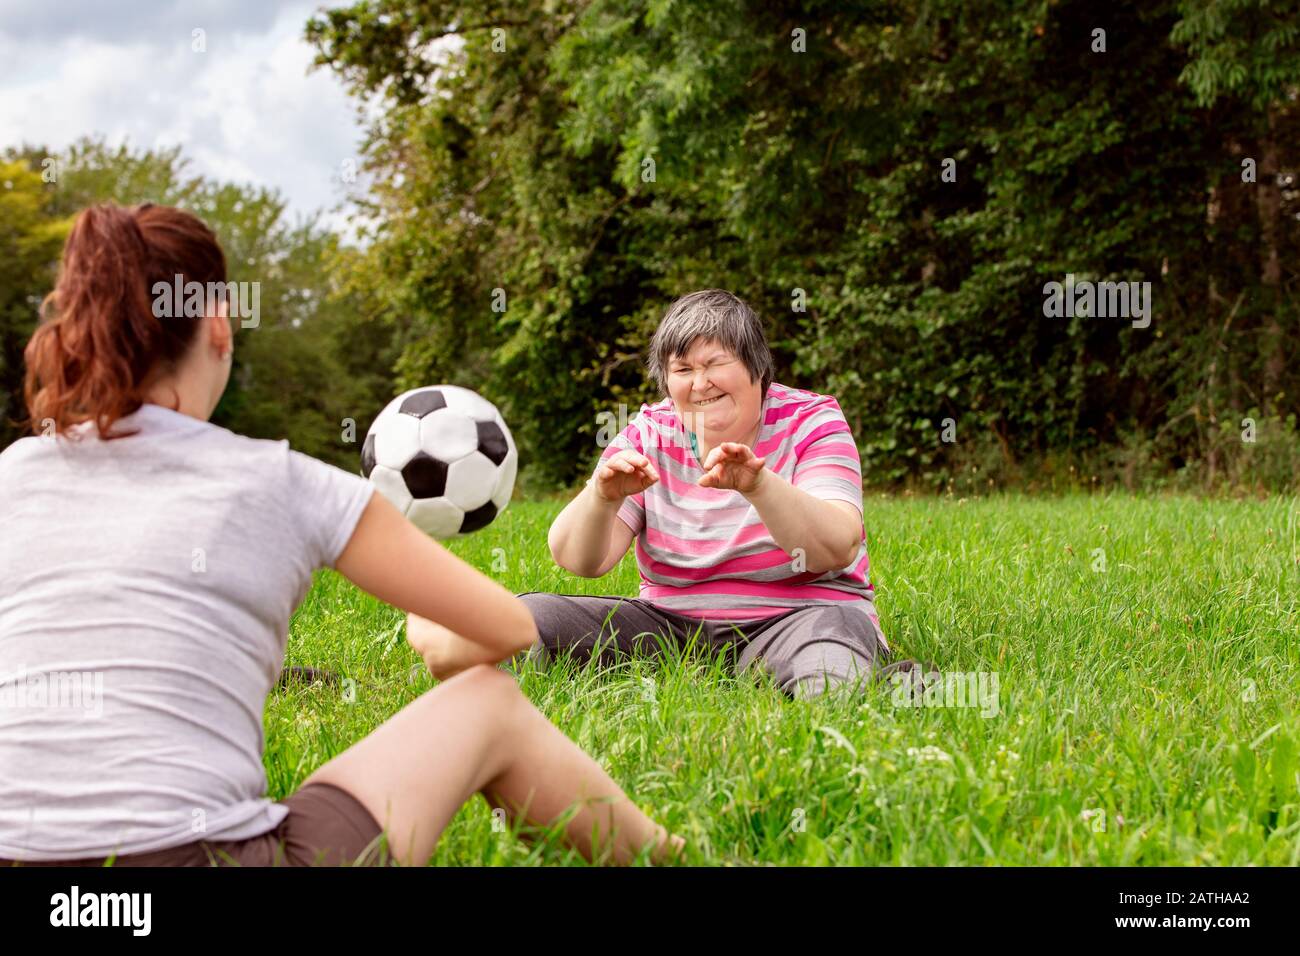 mental disabled woman is throwing a ball to a woman to train her motor function, exercises with a friend or therapist outdoors on a meadow Stock Photo